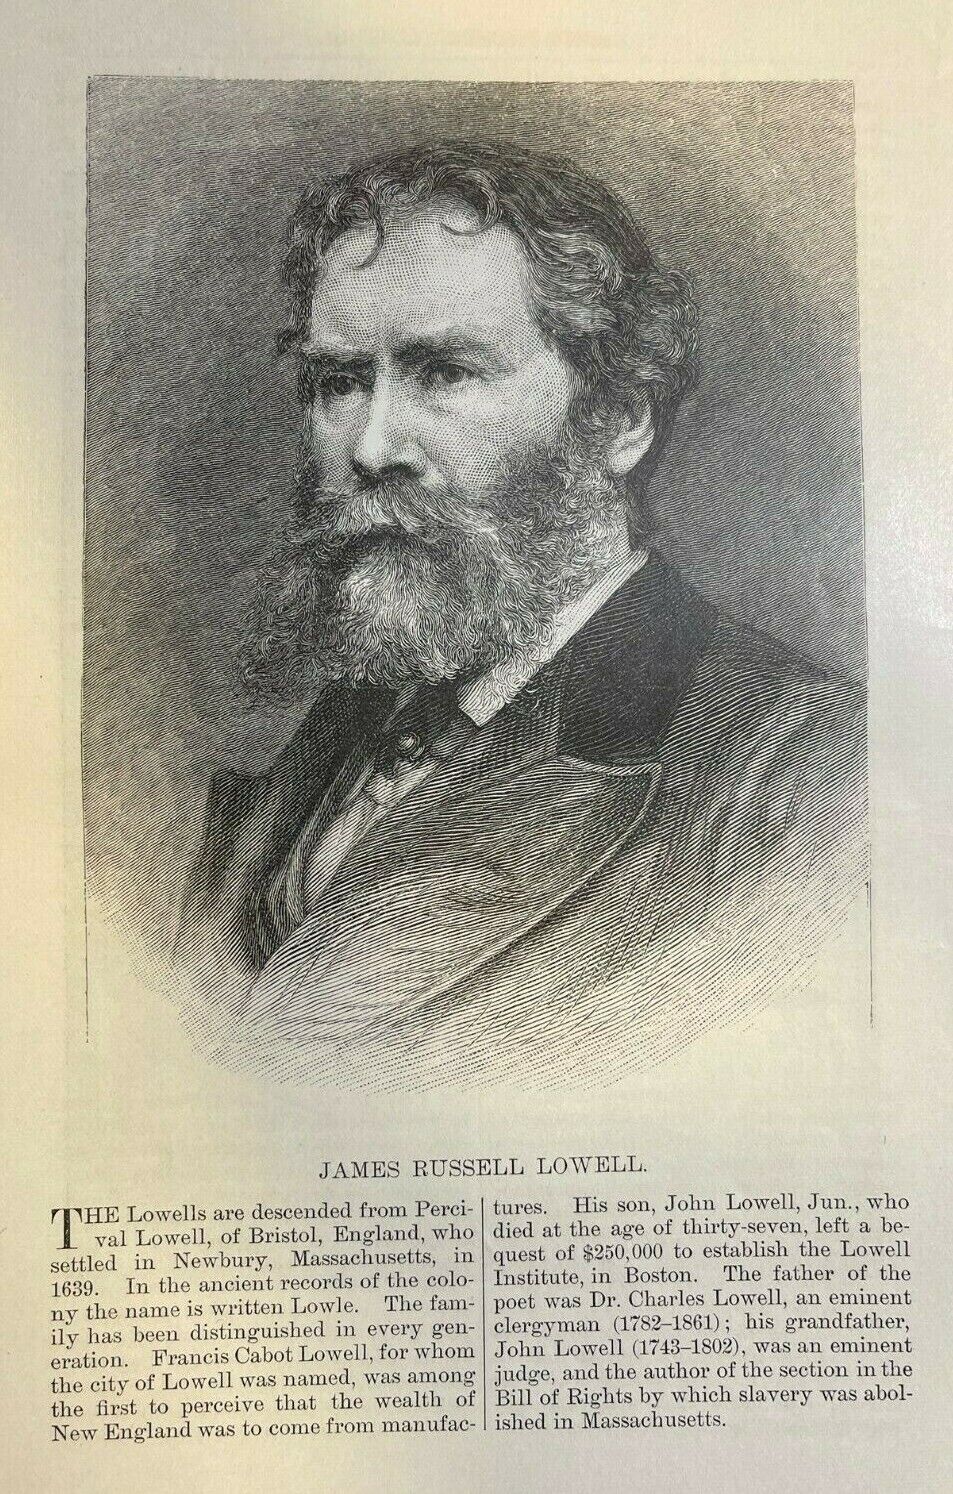 1881 Author James Russell Lowell illustrated